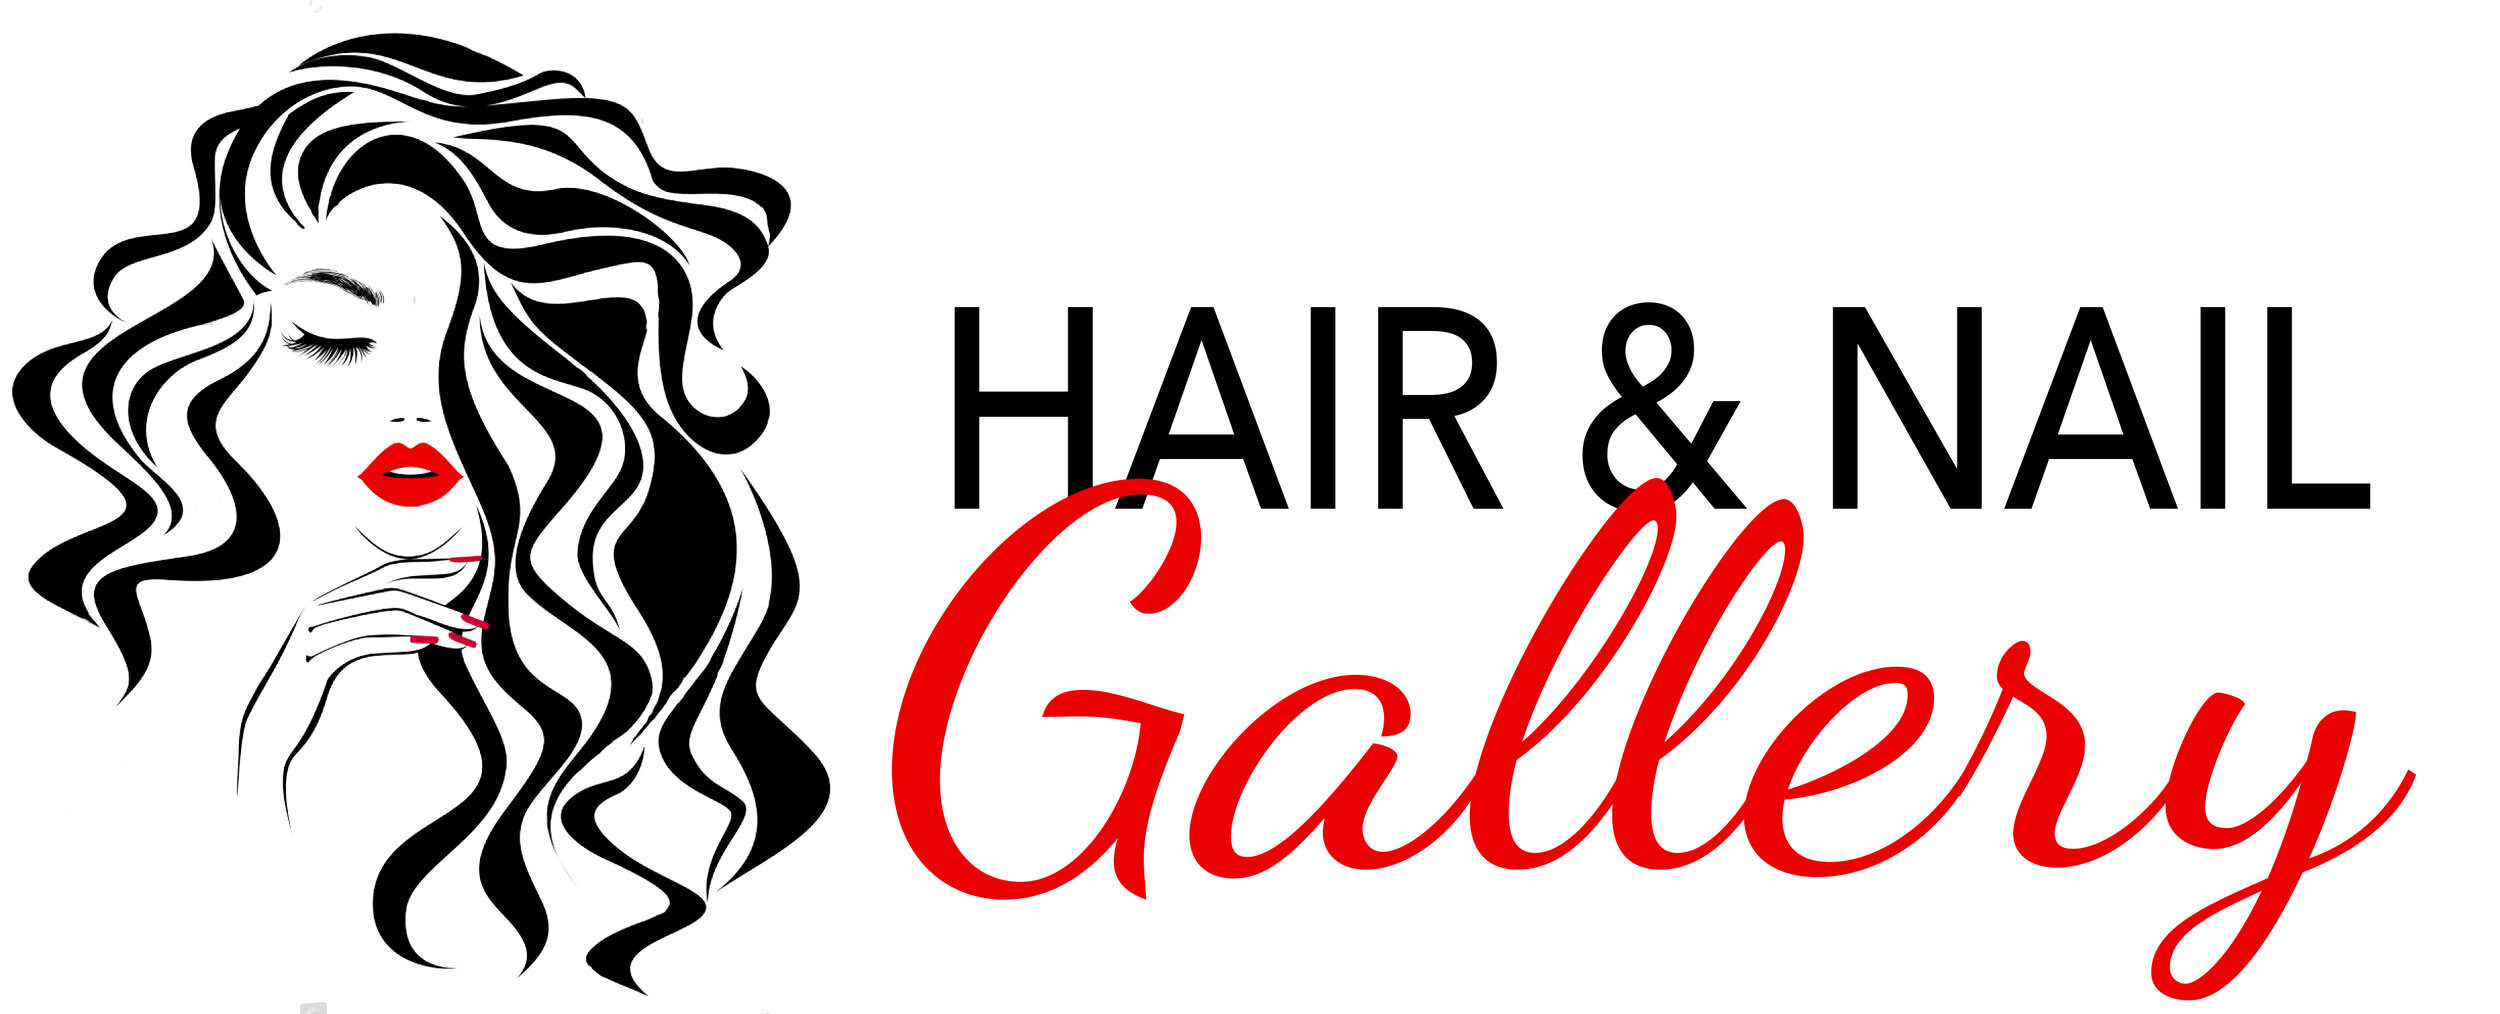 5. Nail and Hair Design Co. - wide 3